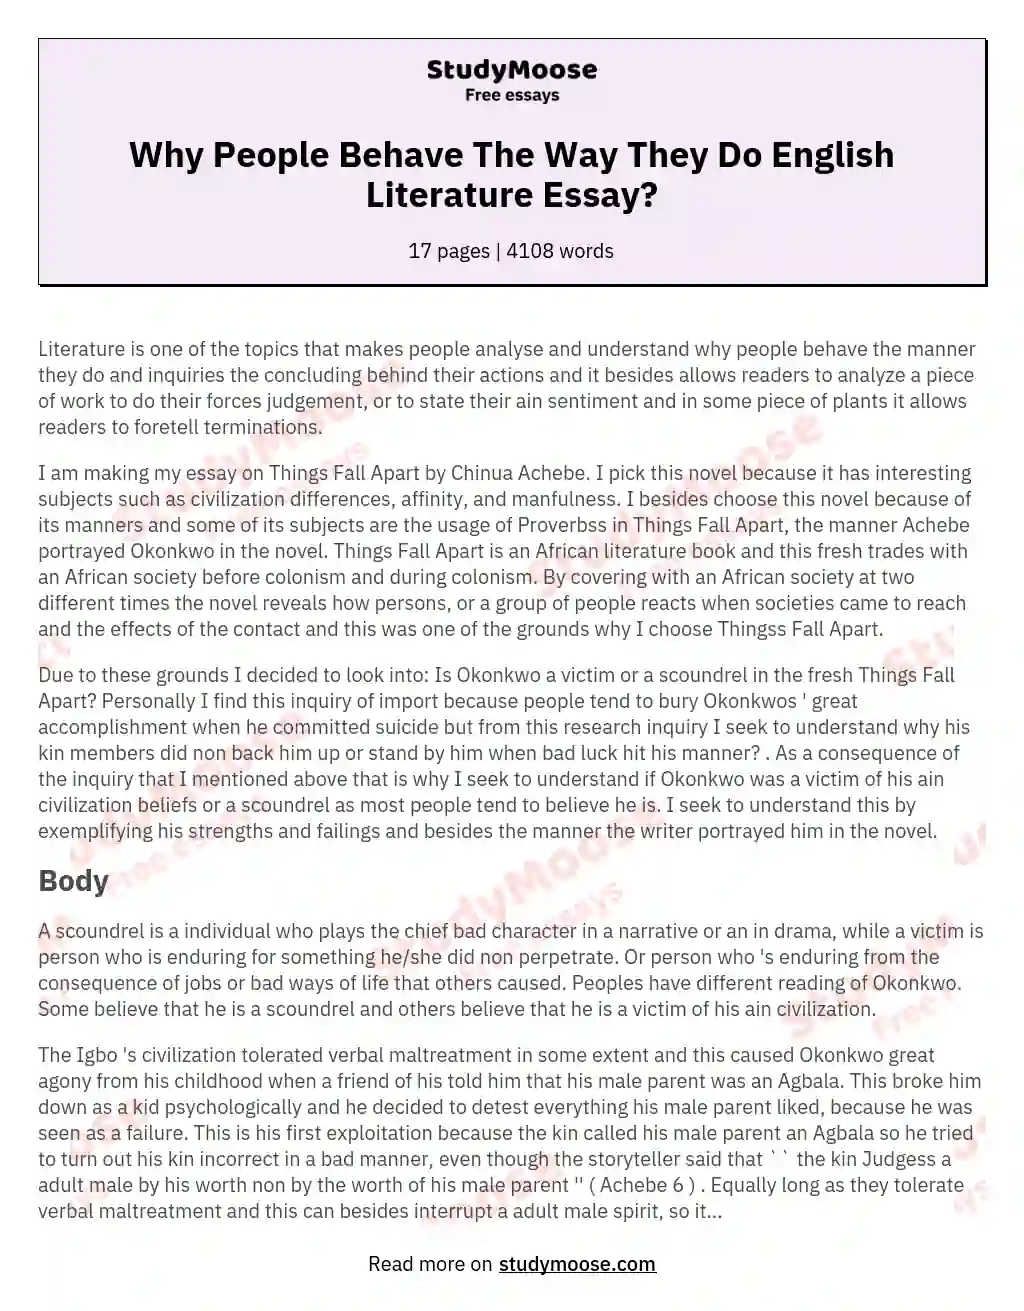 Why People Behave The Way They Do English Literature Essay?